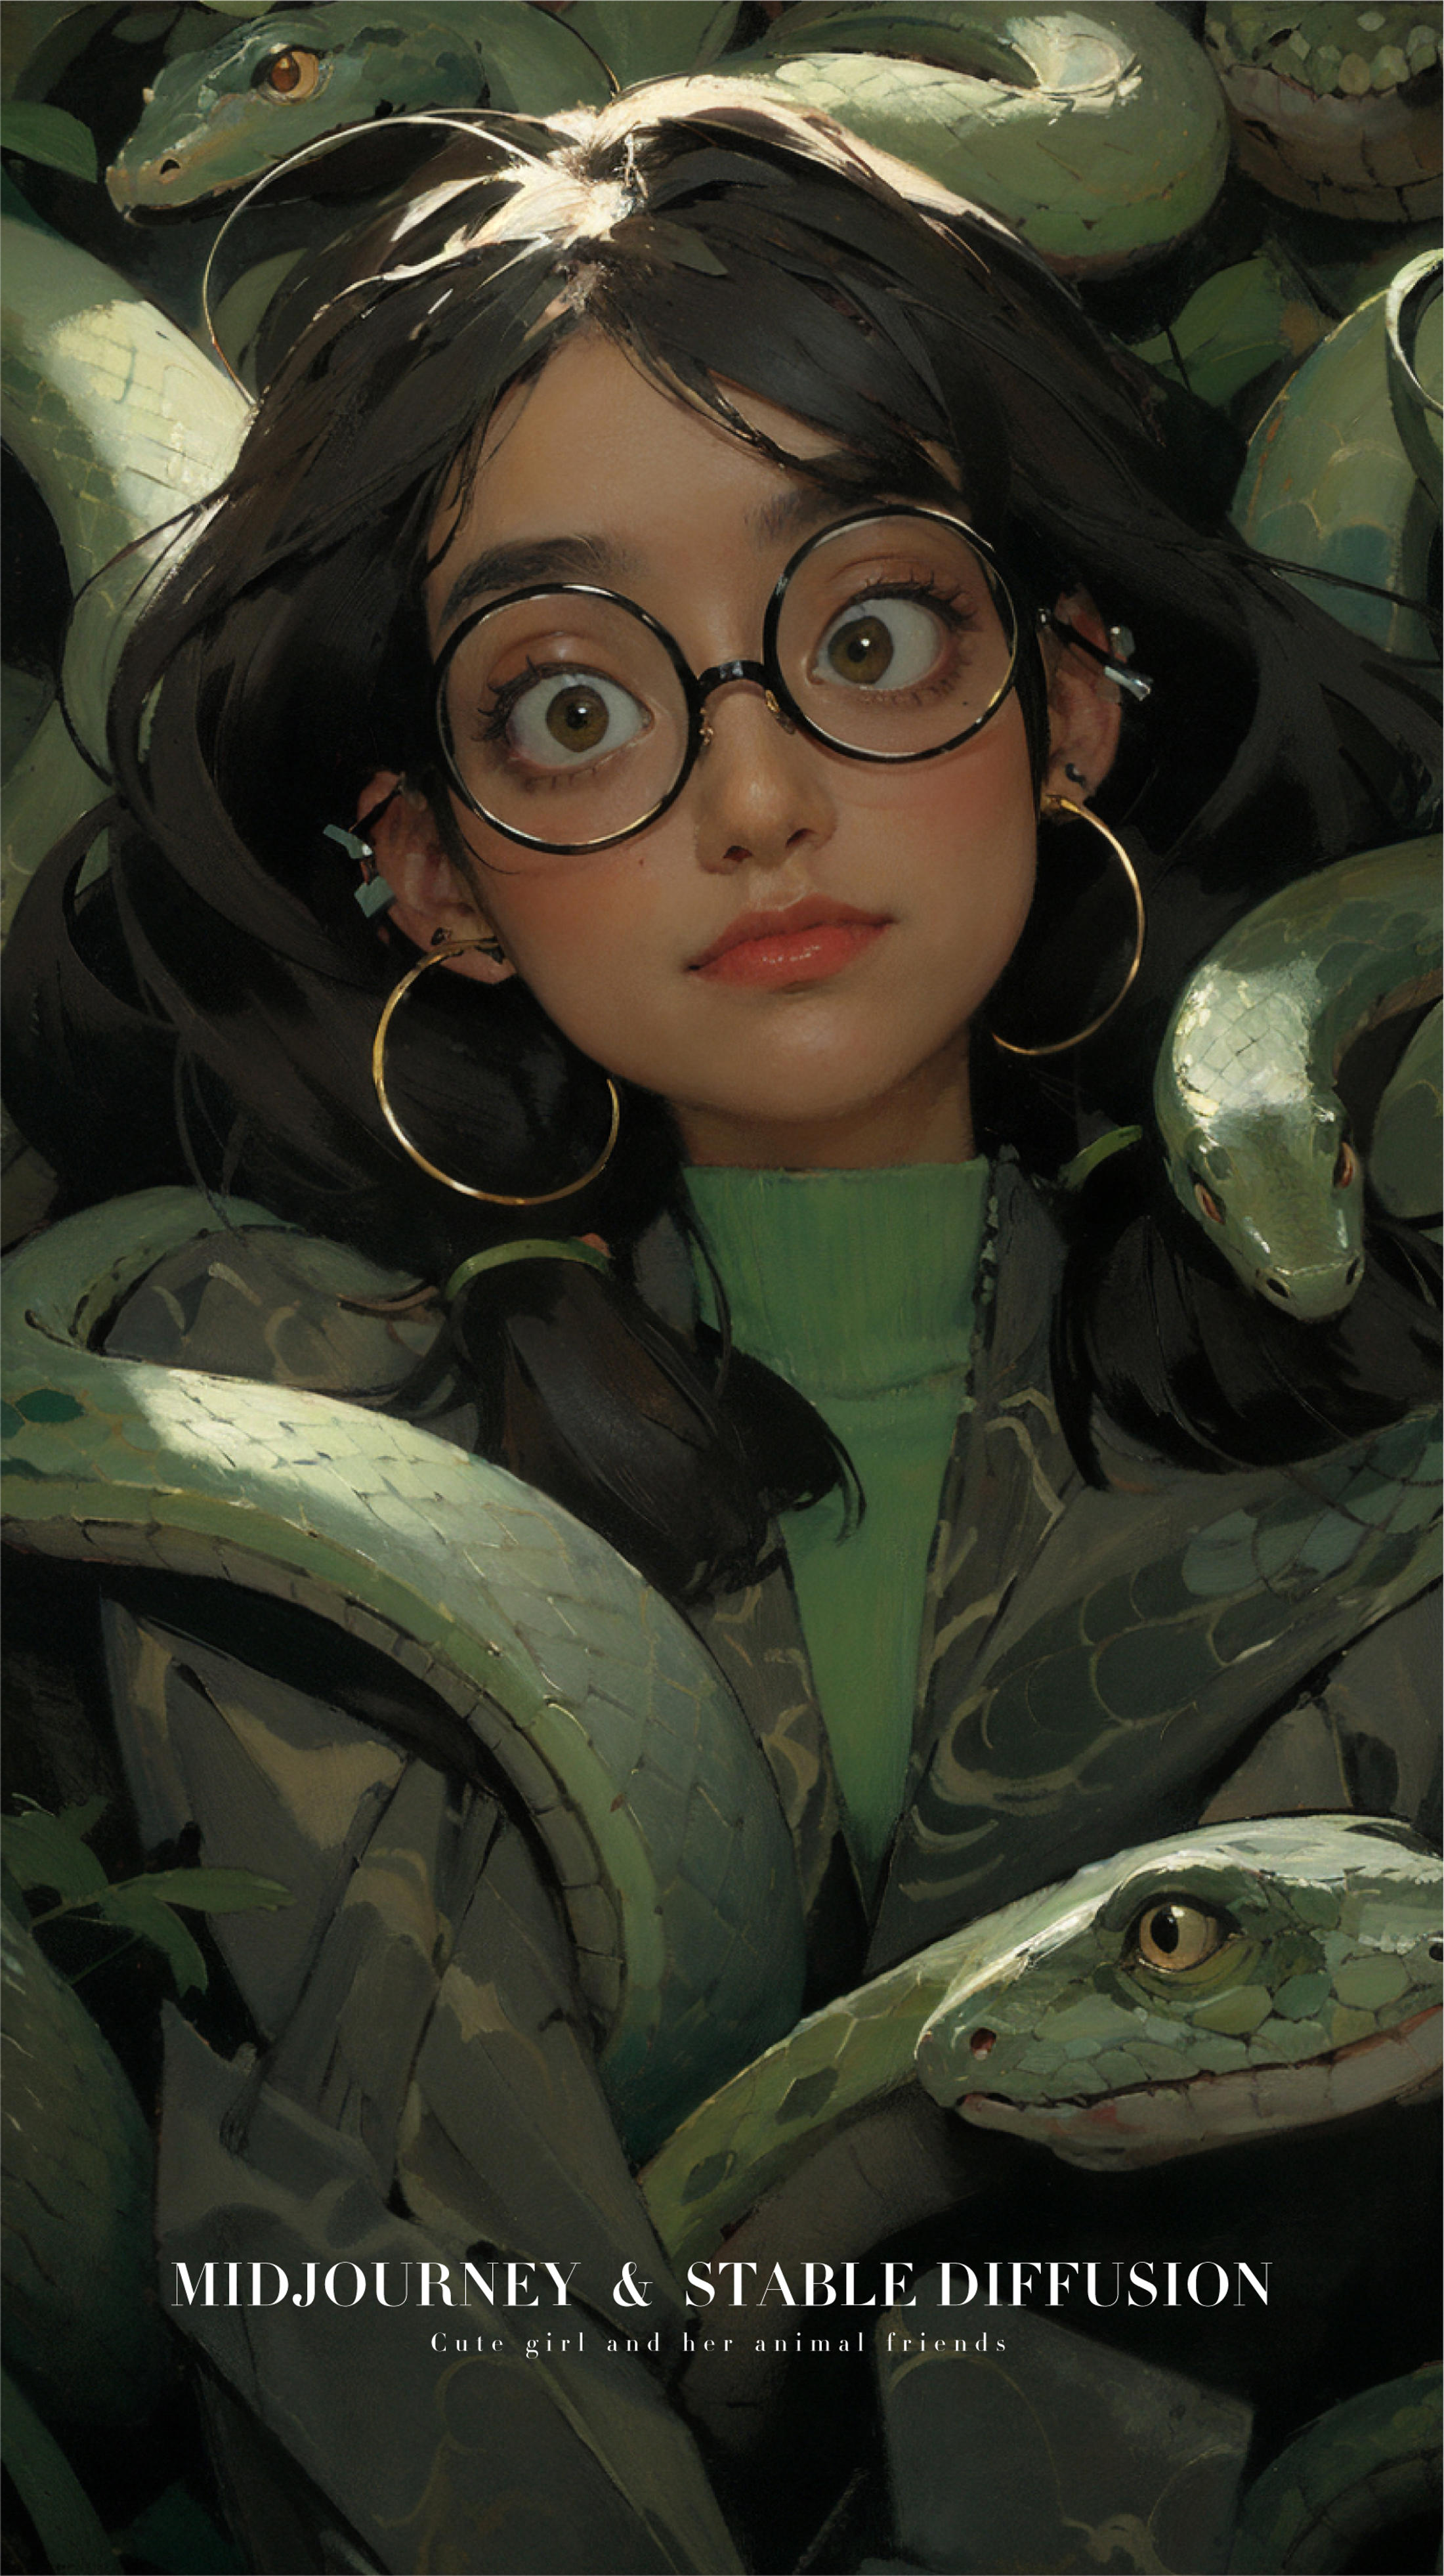 A painting of a woman wearing glasses and surrounded by green snakes.